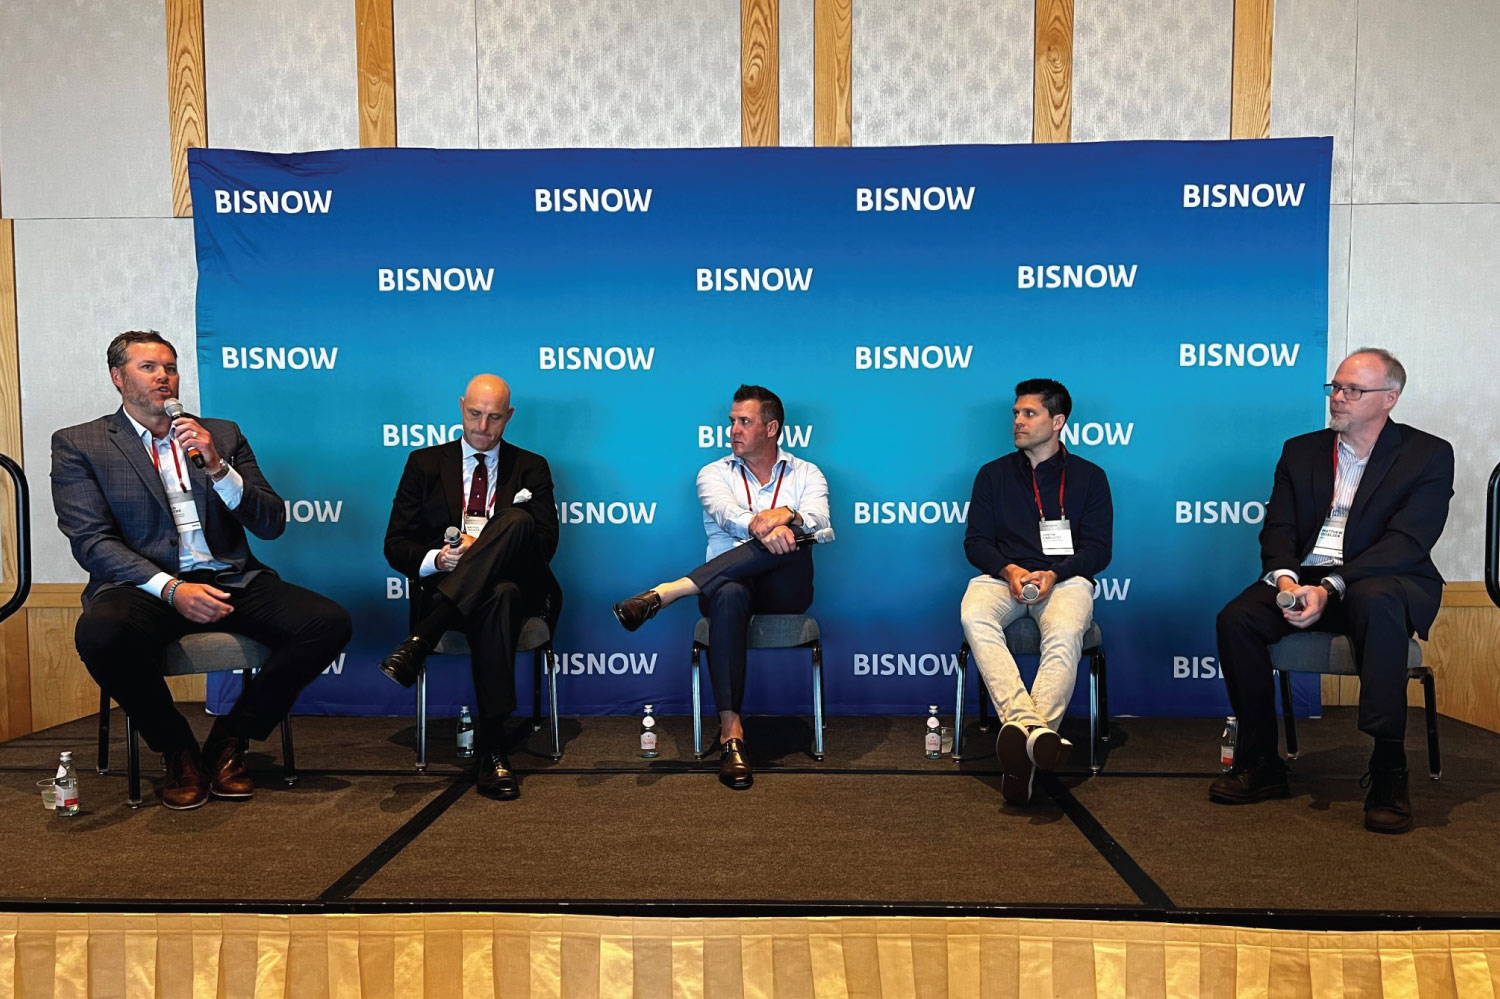 Seattle Industrial Construction & Development Summit: 3 Key Takeaways from the Bisnow Panel